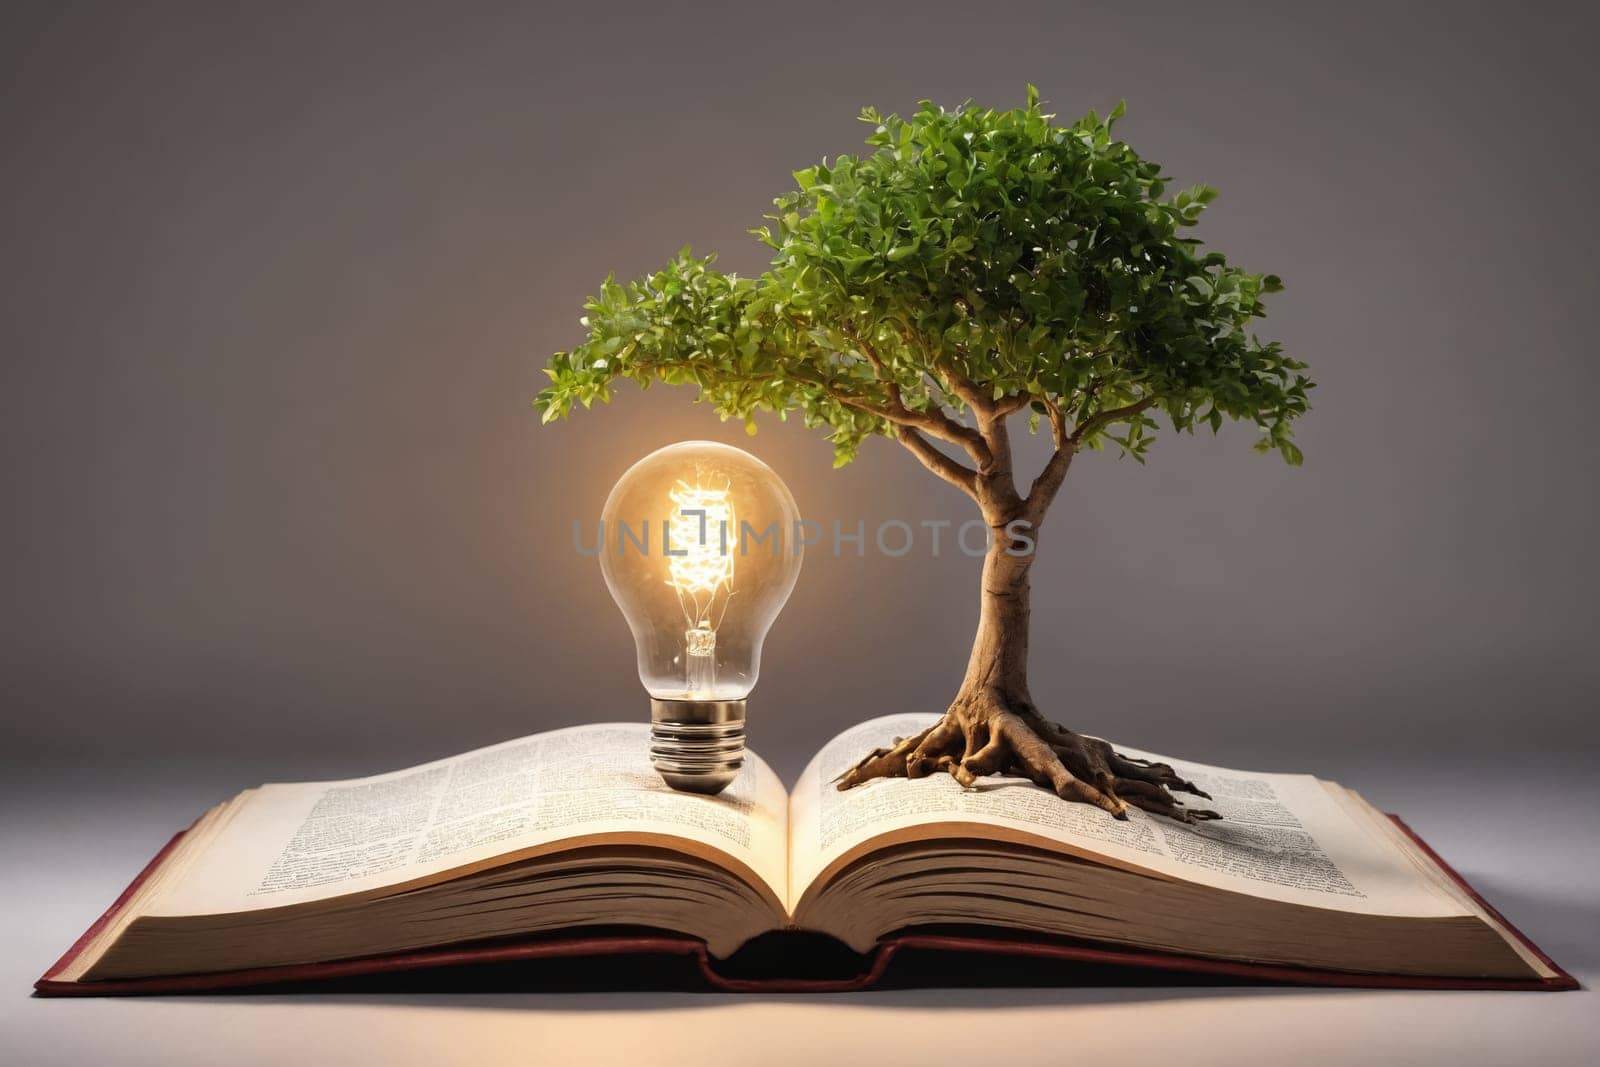 Enlightenment Through Knowledge: Tree Growing from Open Book by Andre1ns